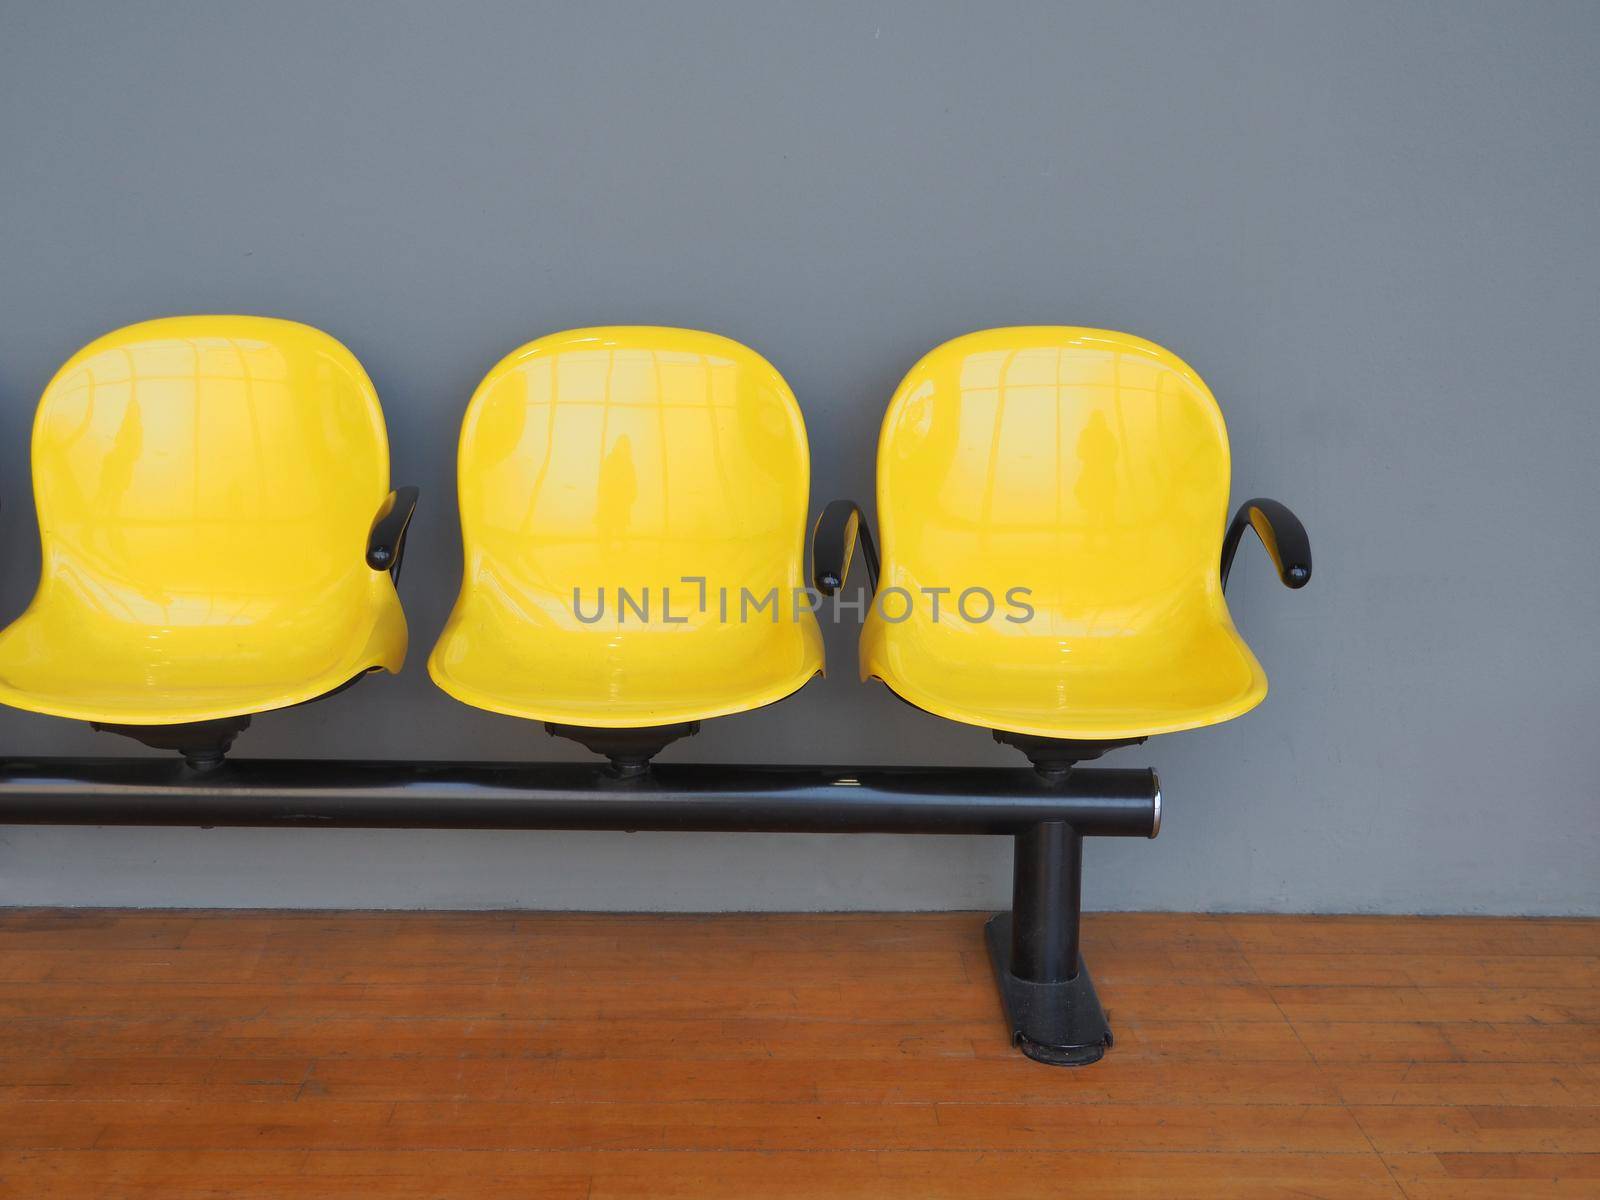 Empty yellow seats in a waiting room by lemar